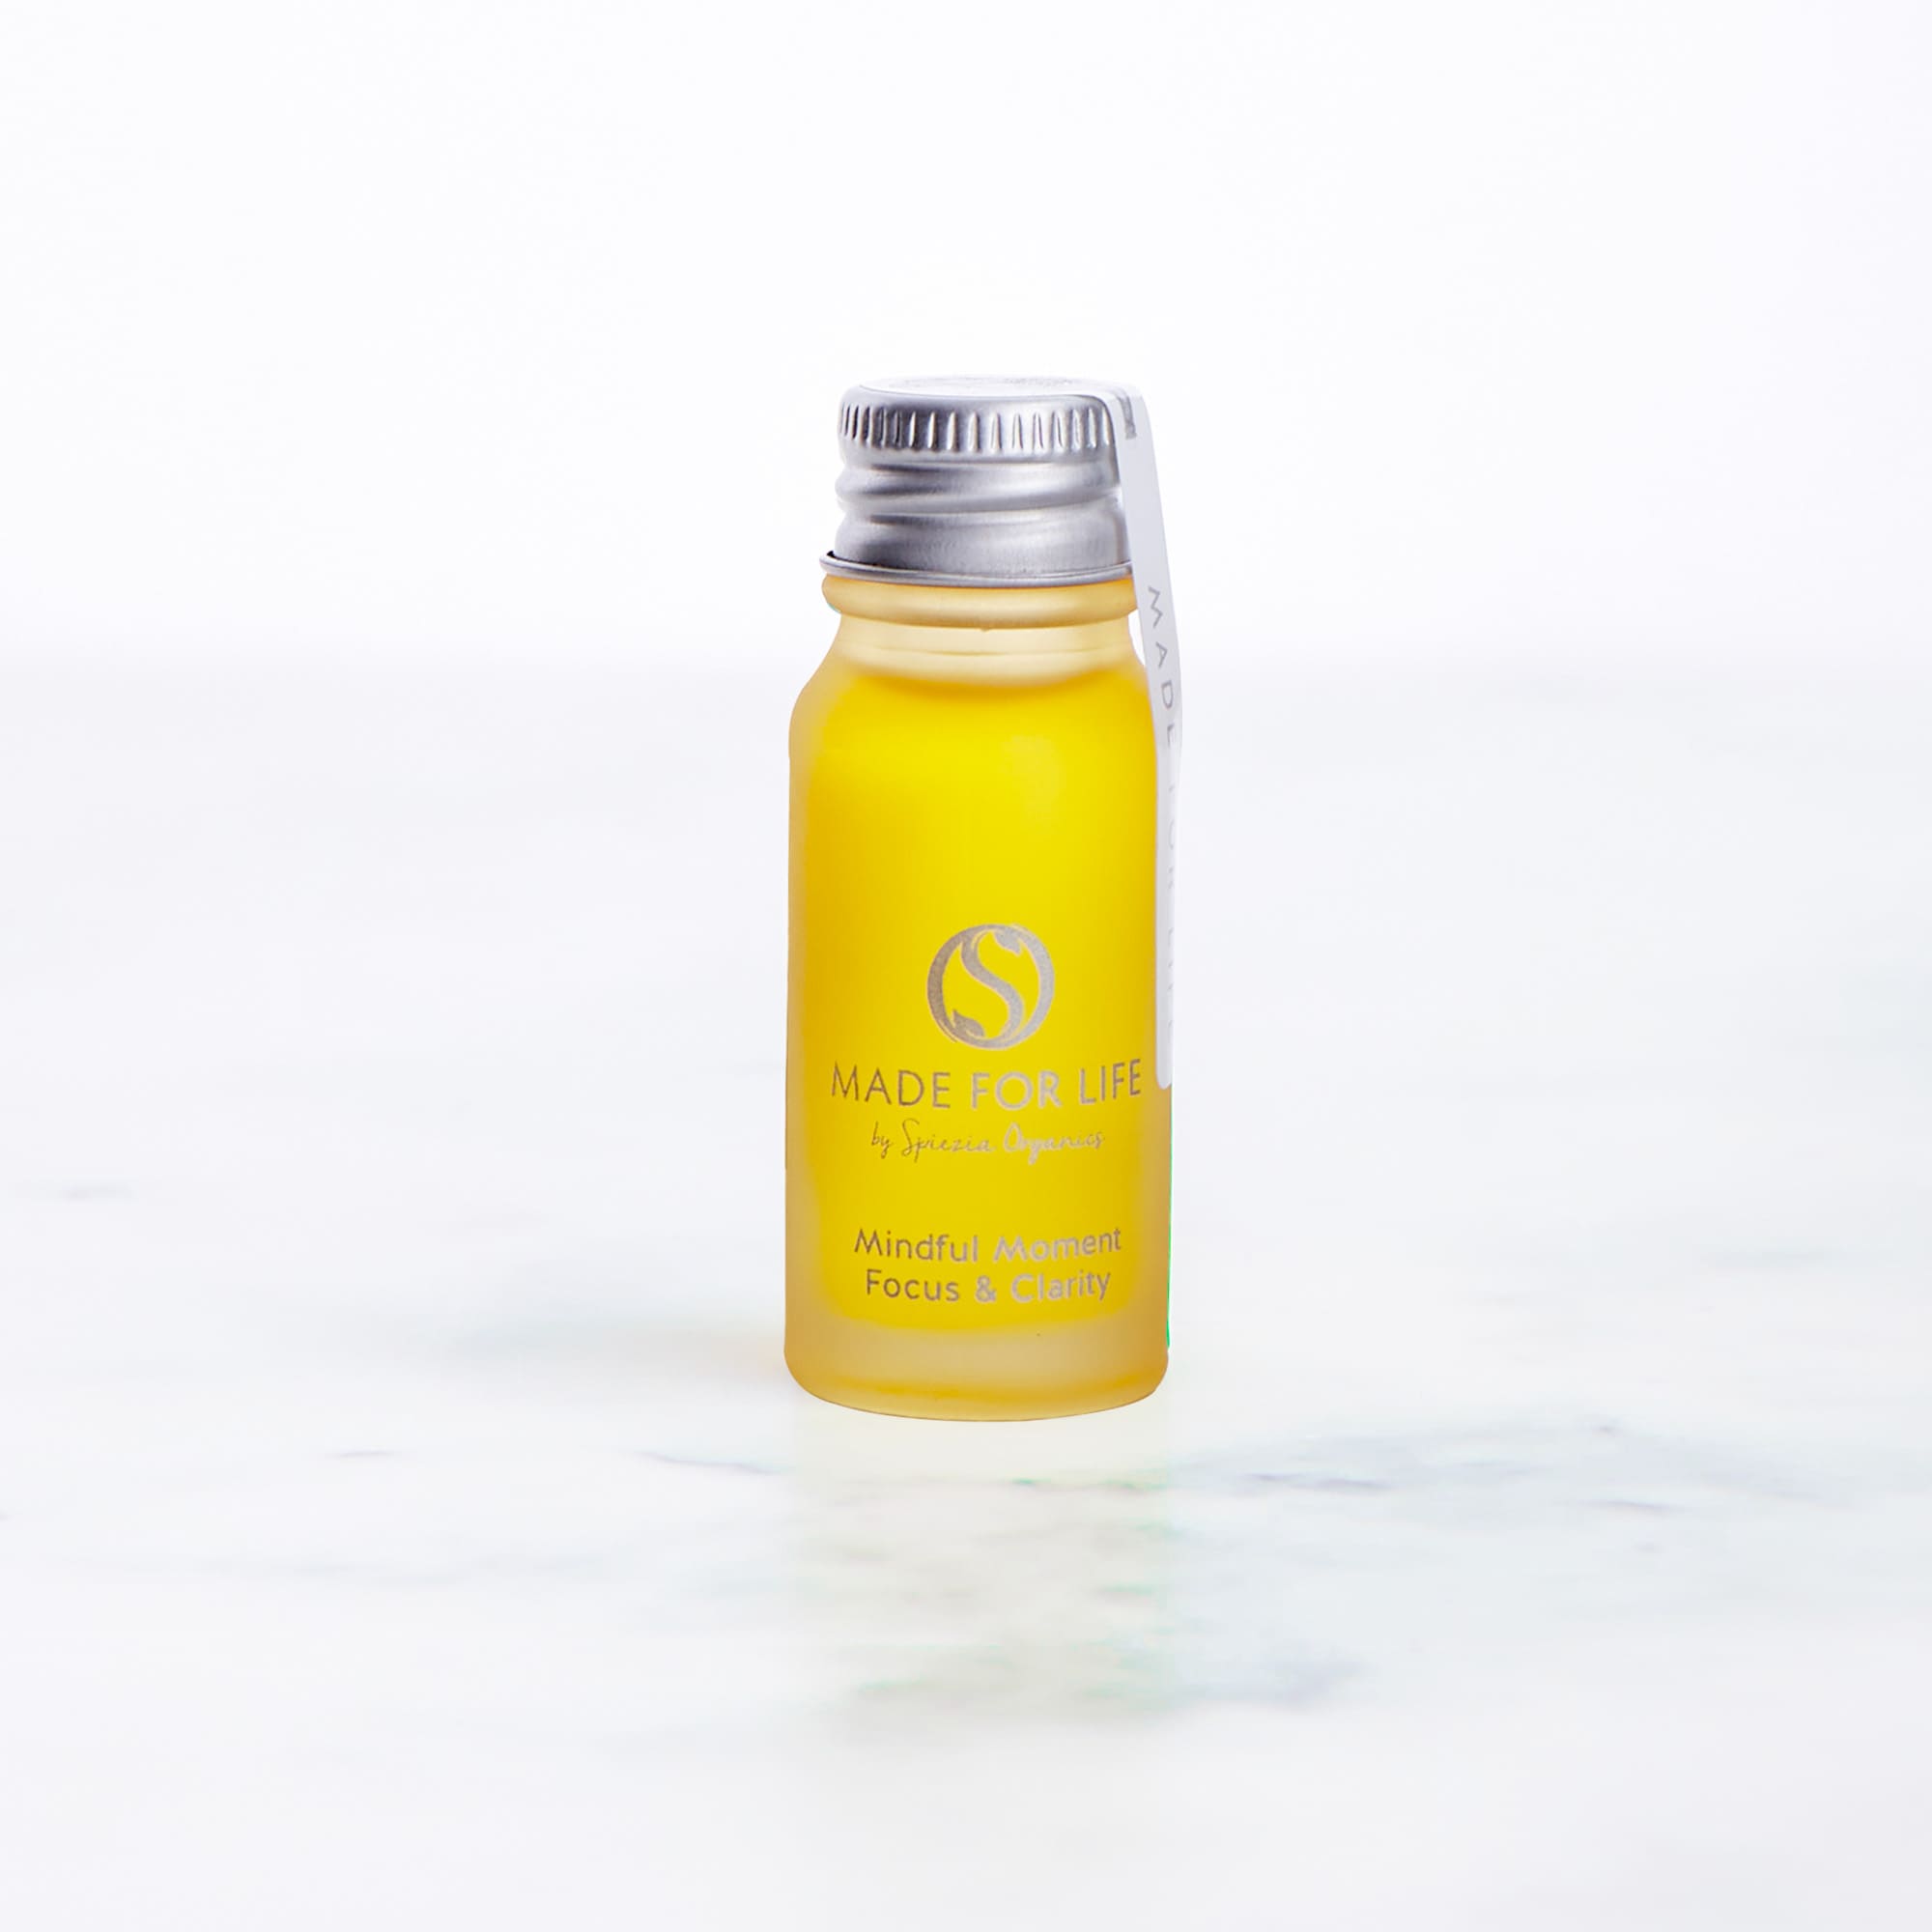 Mindful Moment - Focus and Clarity 10ml